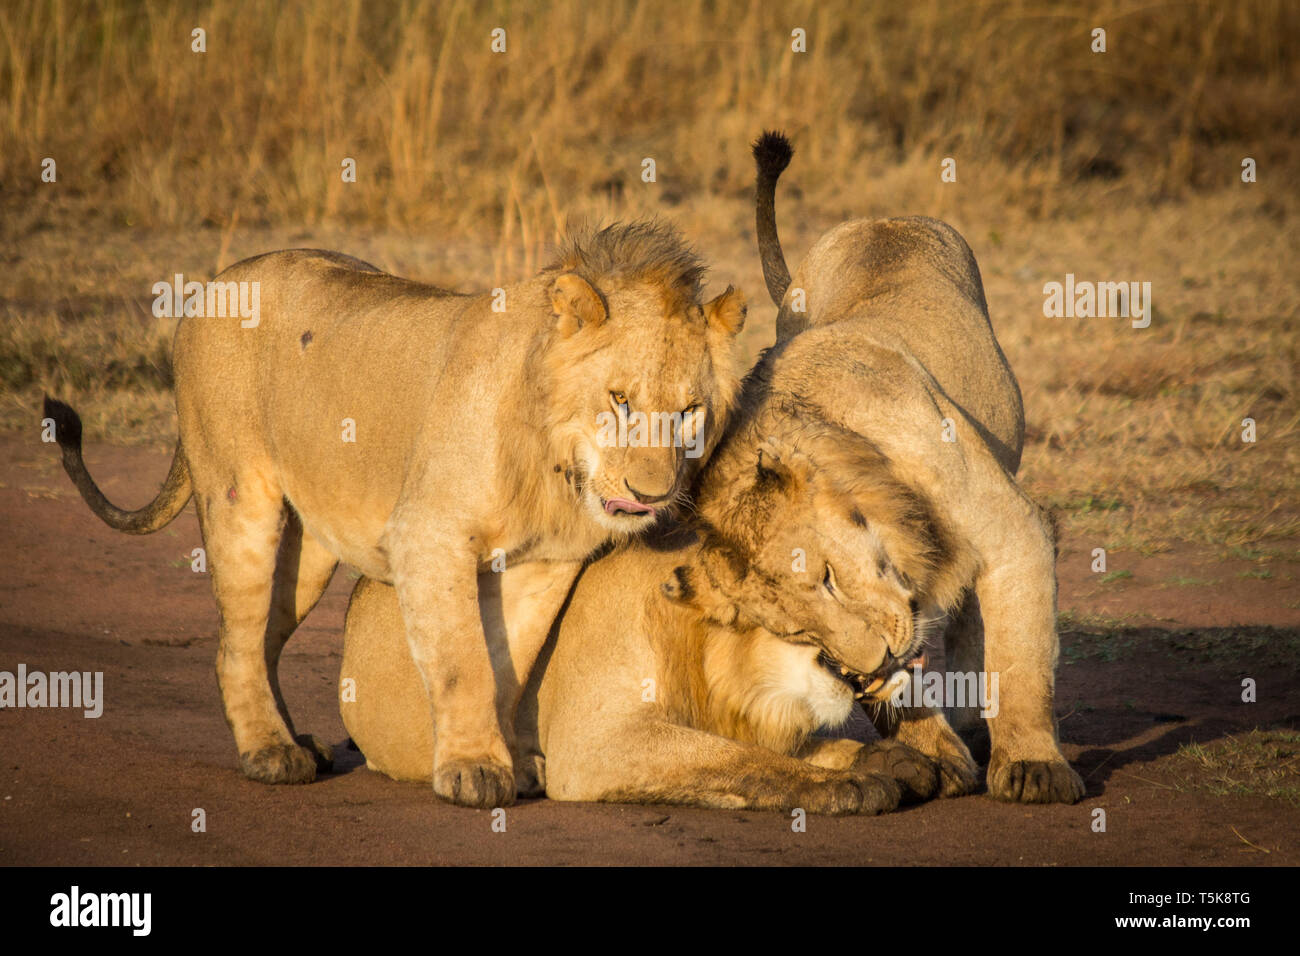 A pride of lions playfully cuddle on the savanna in Serengeti National Park in Tanzania Stock Photo